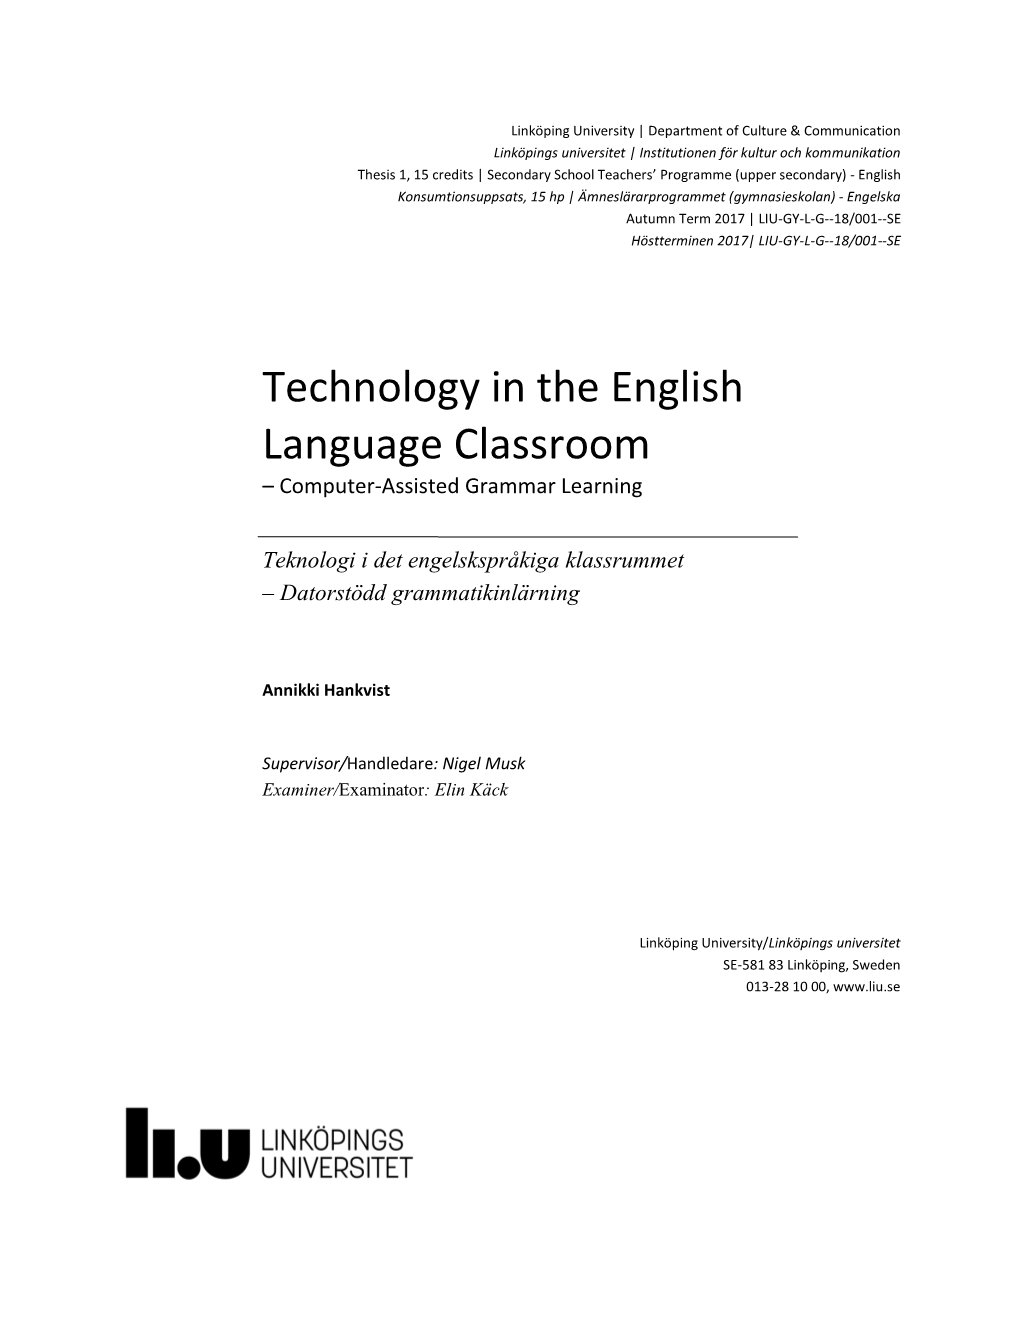 Technology in the English Language Classroom – Computer-Assisted Grammar Learning